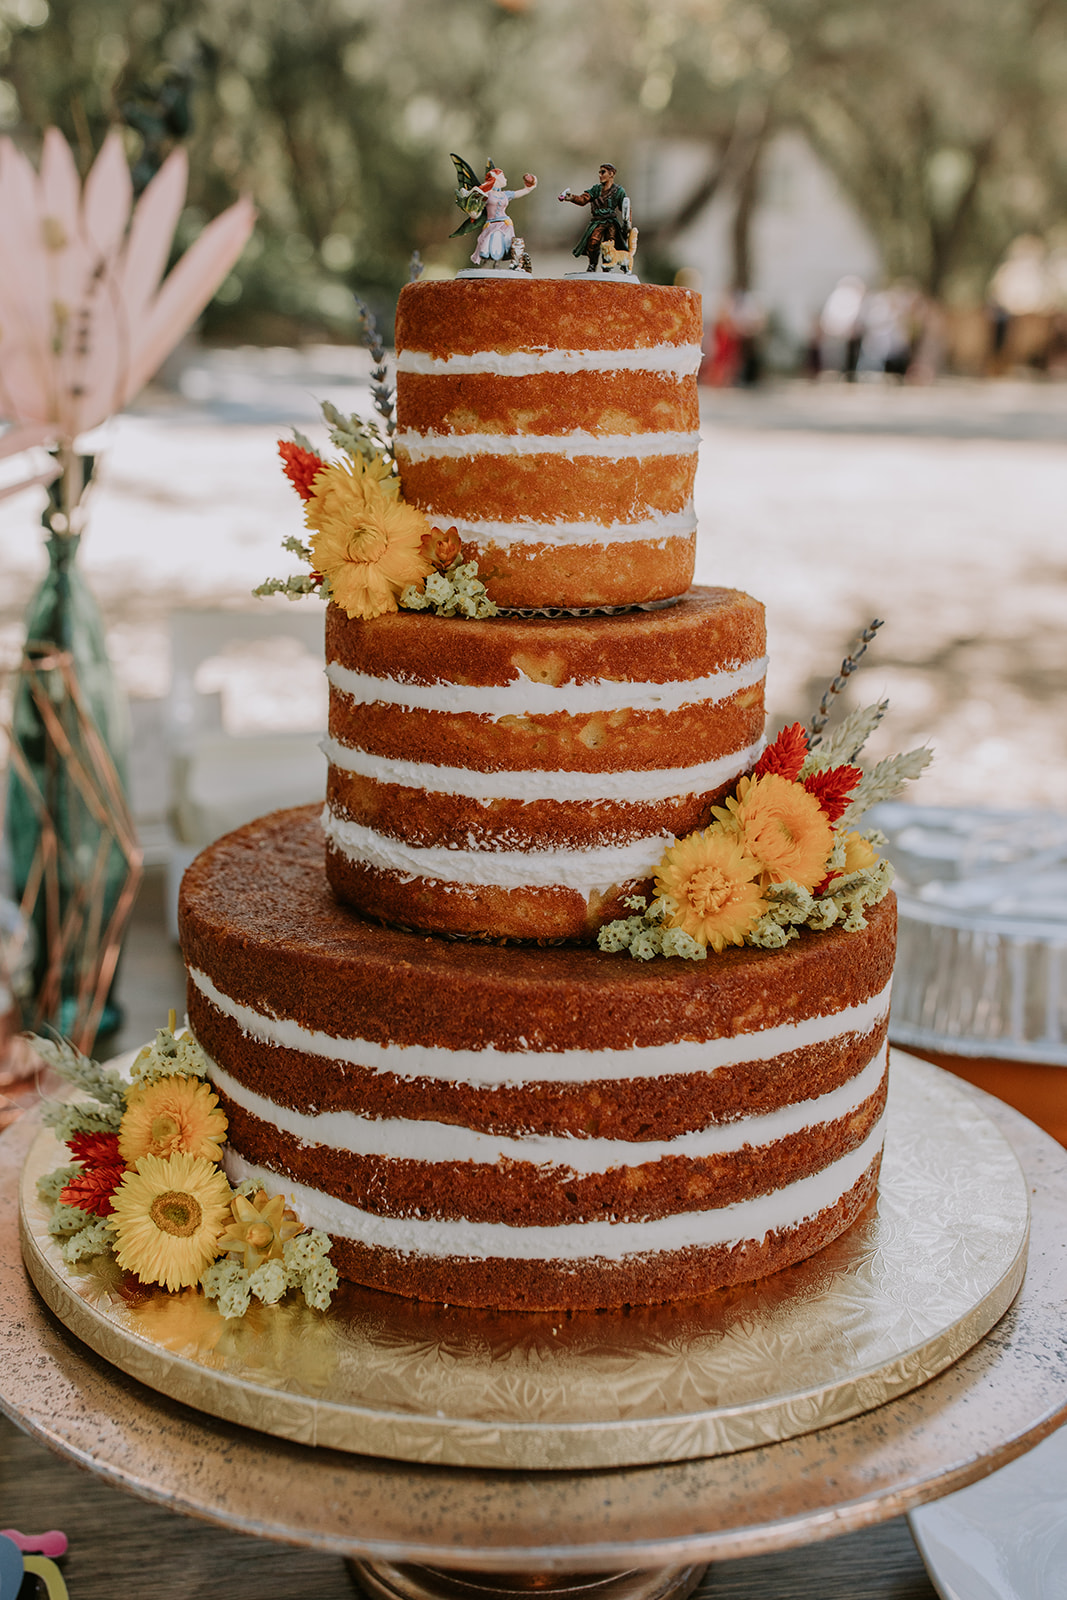 70s themed wedding cake with warm colored flowers placed on it